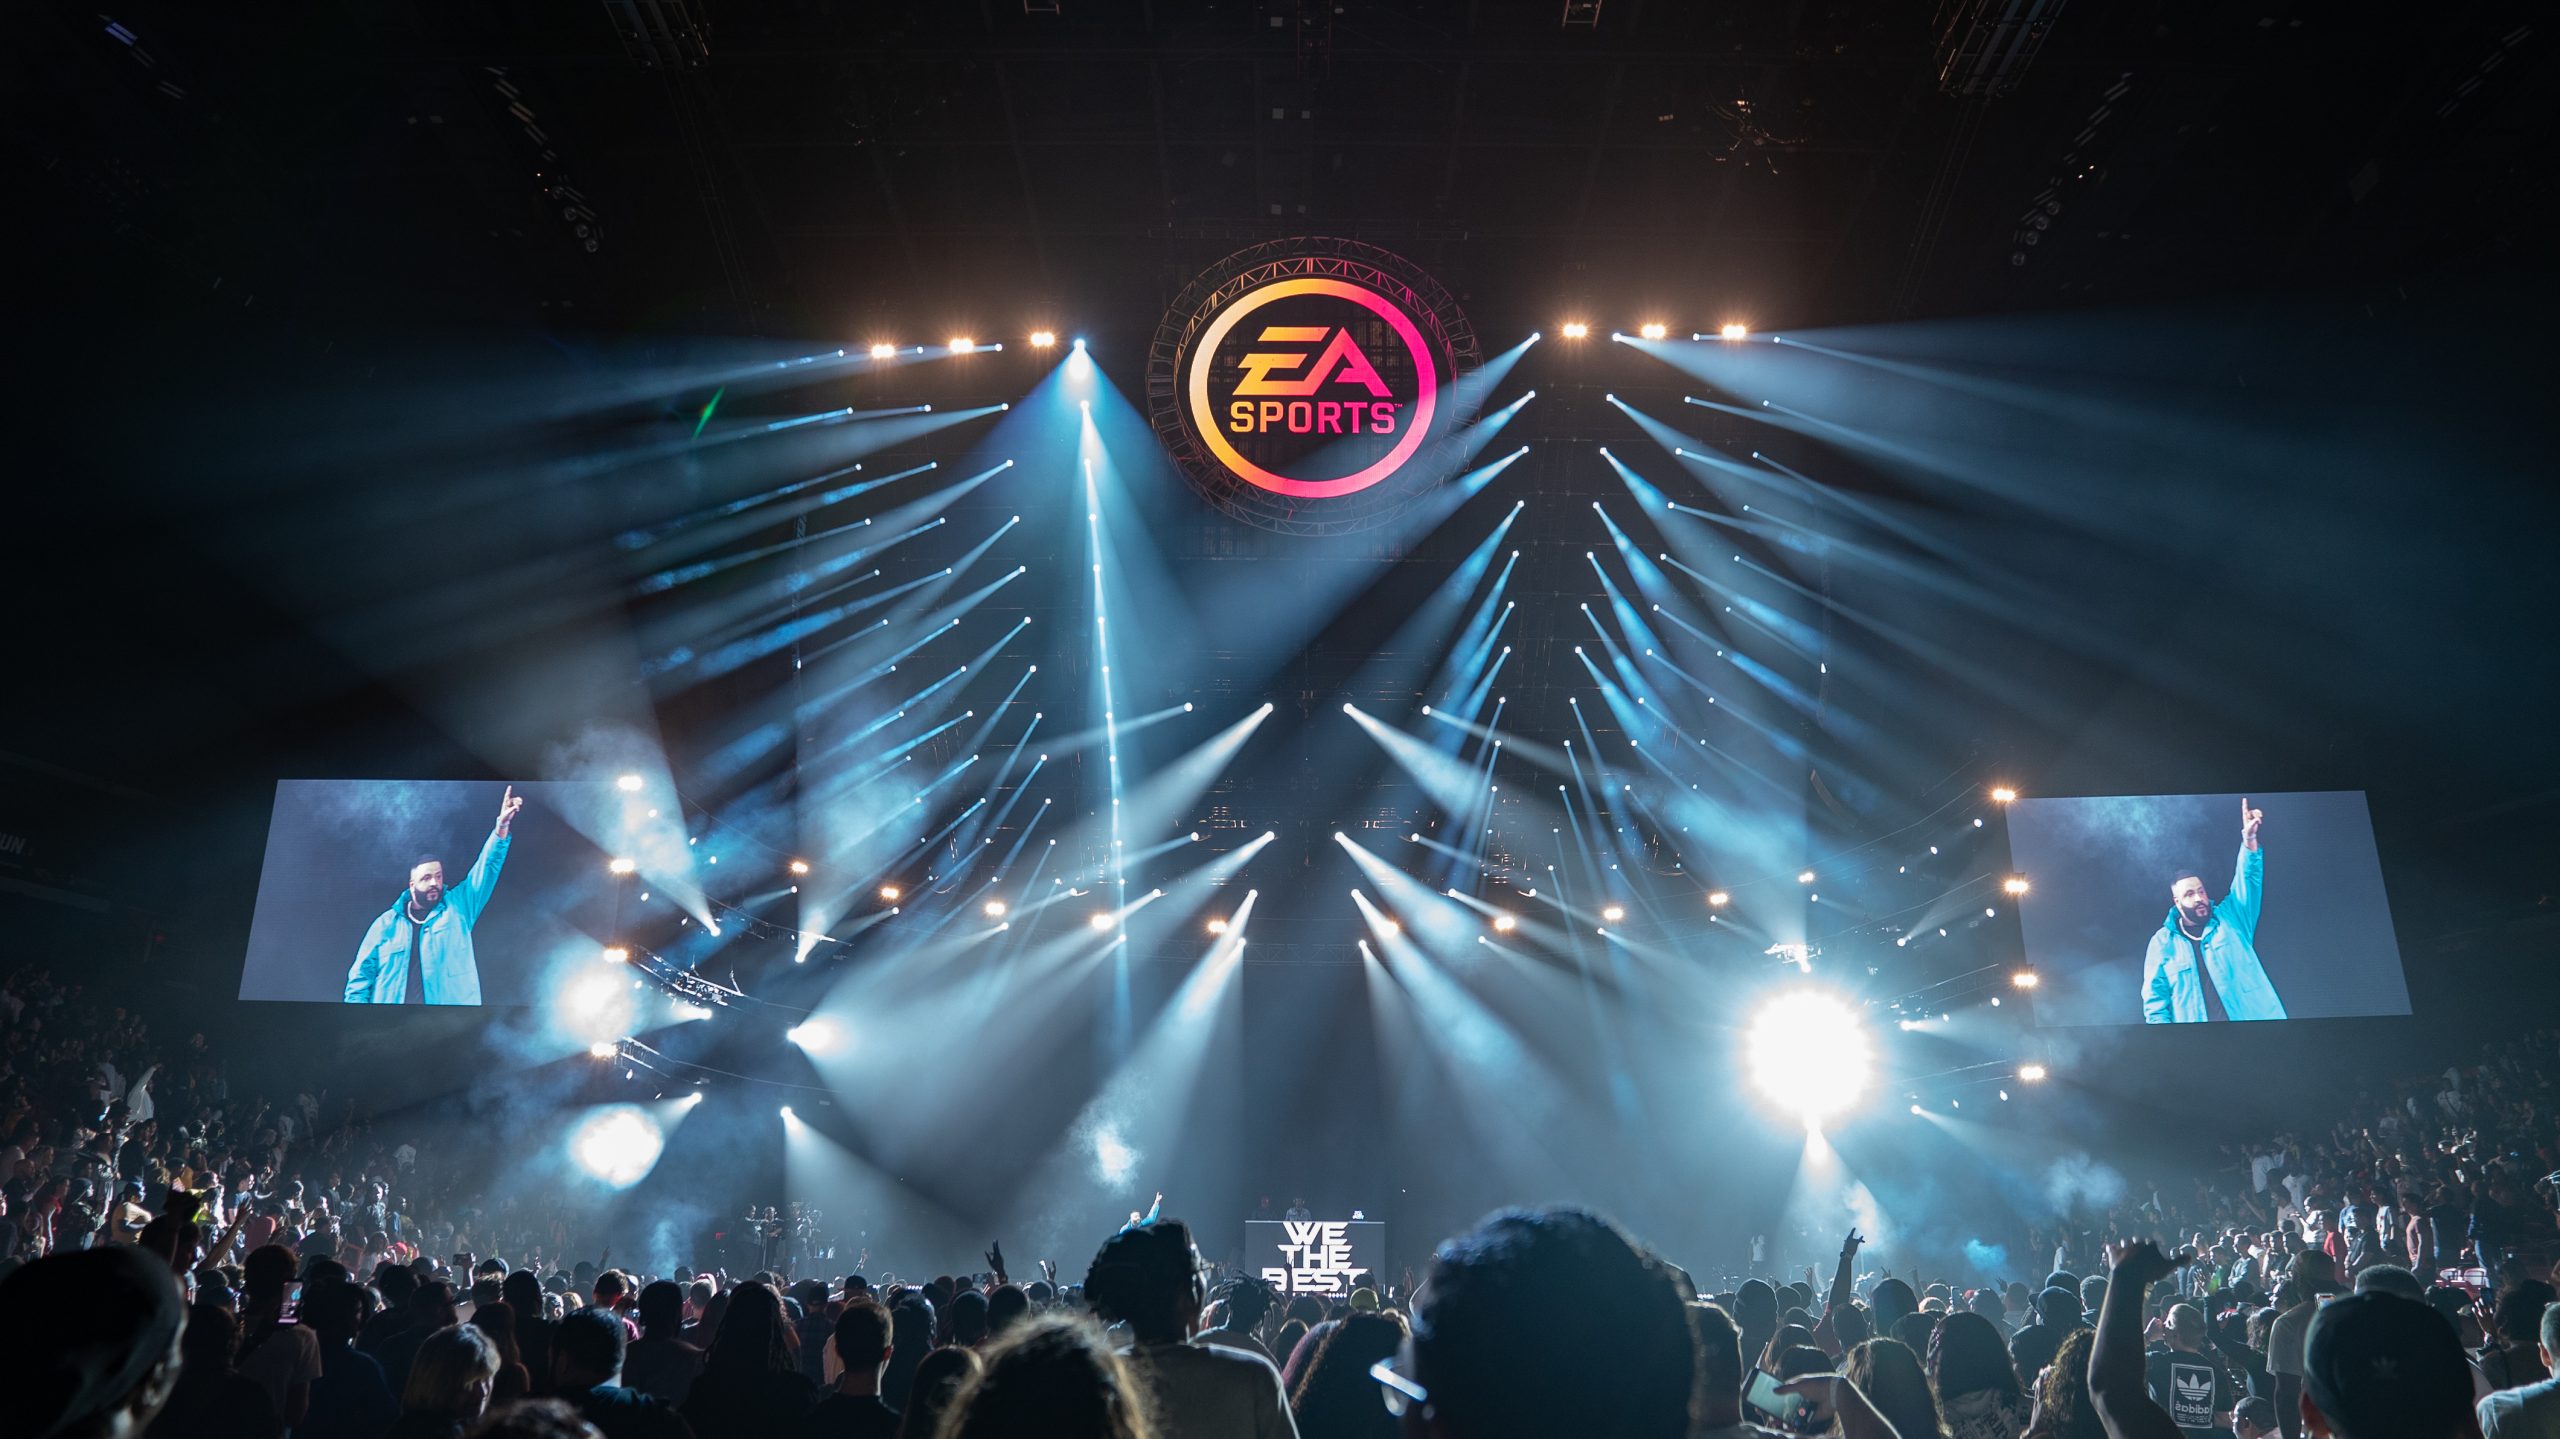 EA Sports hosting a esports competition for Premier League clubs